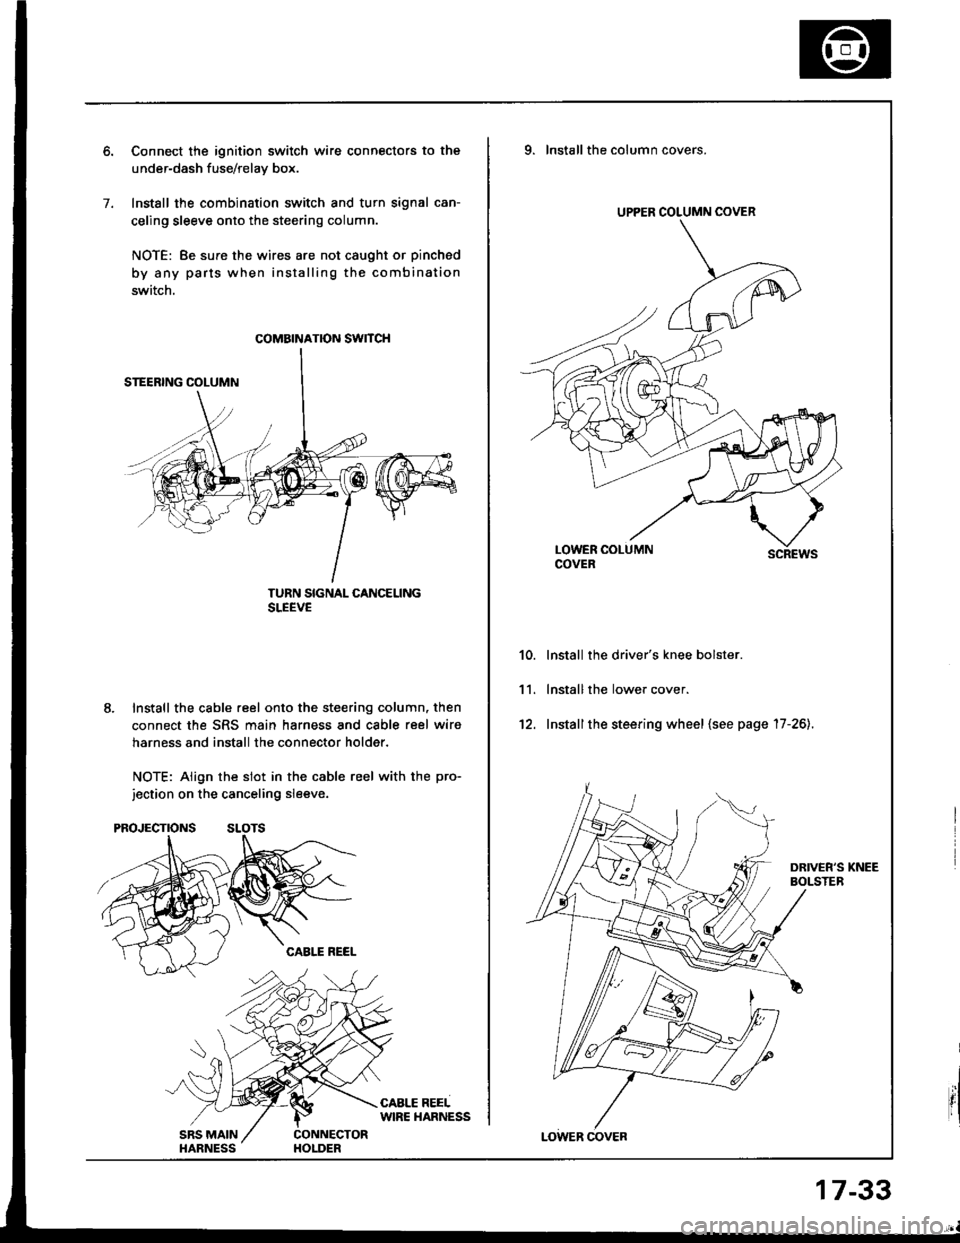 HONDA INTEGRA 1994 4.G Owners Manual 7.
Connect the ignition switch wire connectors to the
under-dash fuse/relav box.
Install the combination switch and turn signal can-
celing sleeve onto the steering column.
NOTE: Be sure the wires are